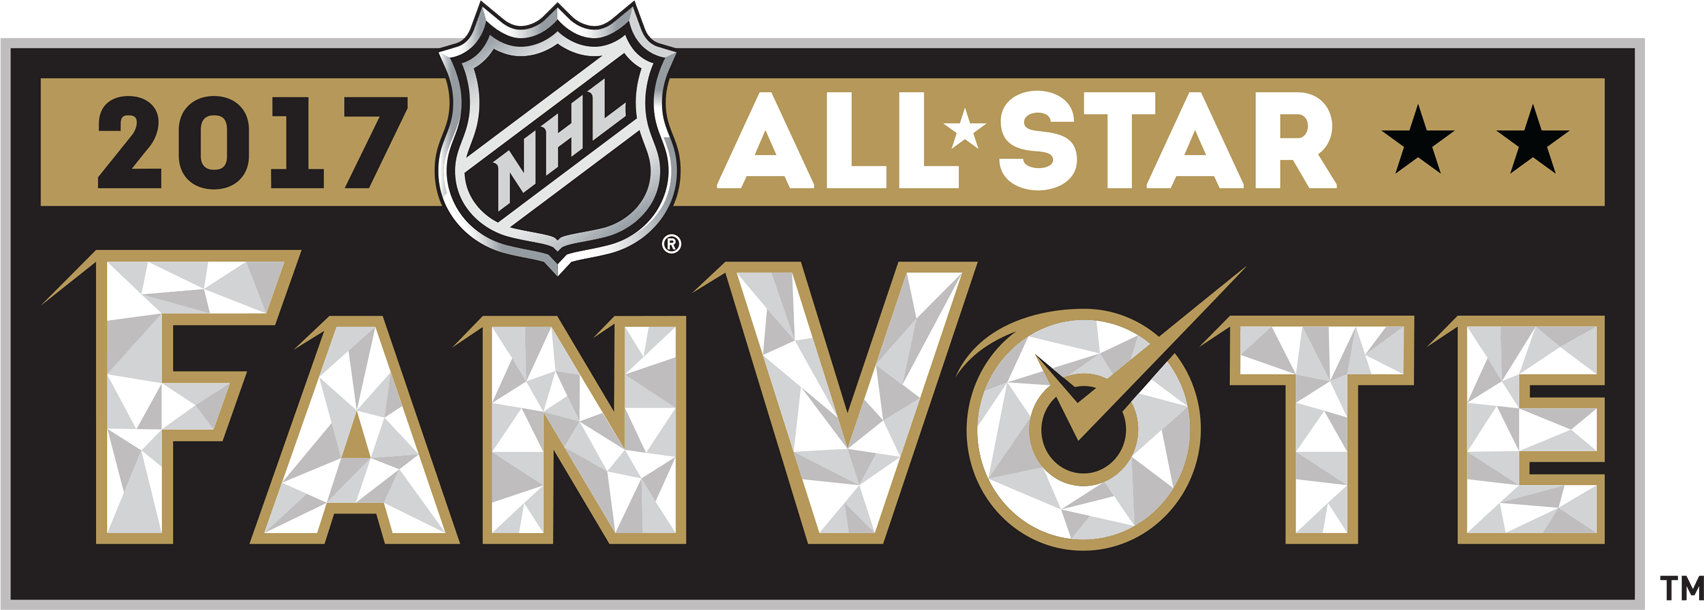 NHL All-Star Fan Vote Sweepstakes 2017 (NHL.com/Vote)